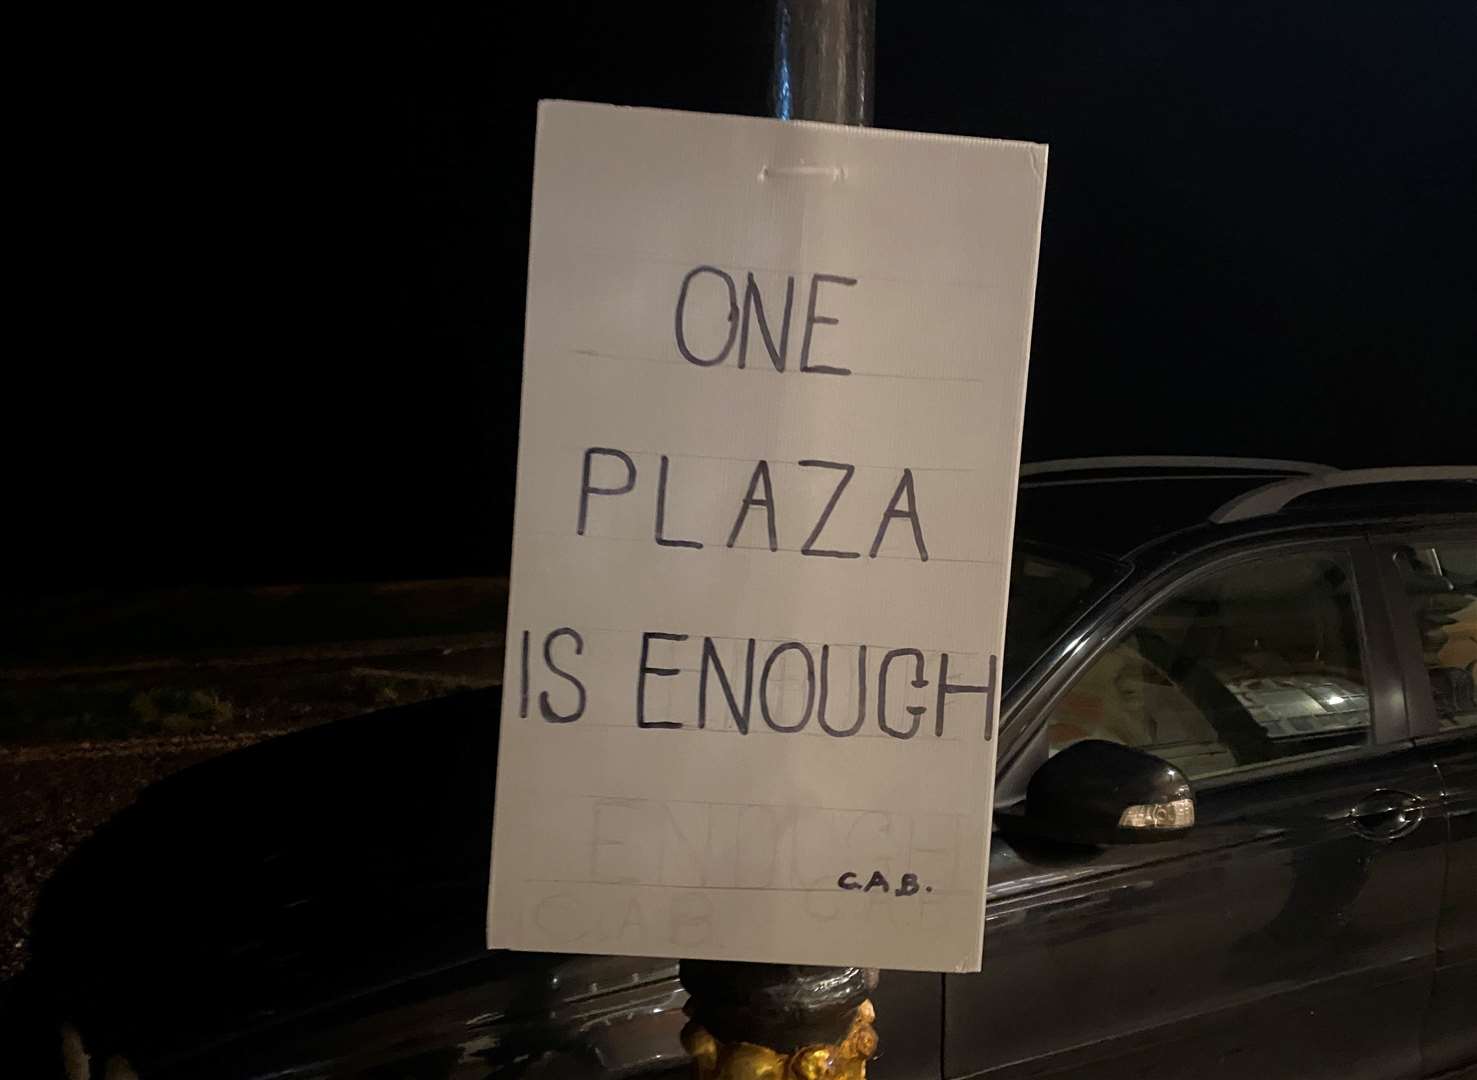 Posters were erected outside a town meeting held over a controversial new one-way system and seafront plaza in Herne Bay